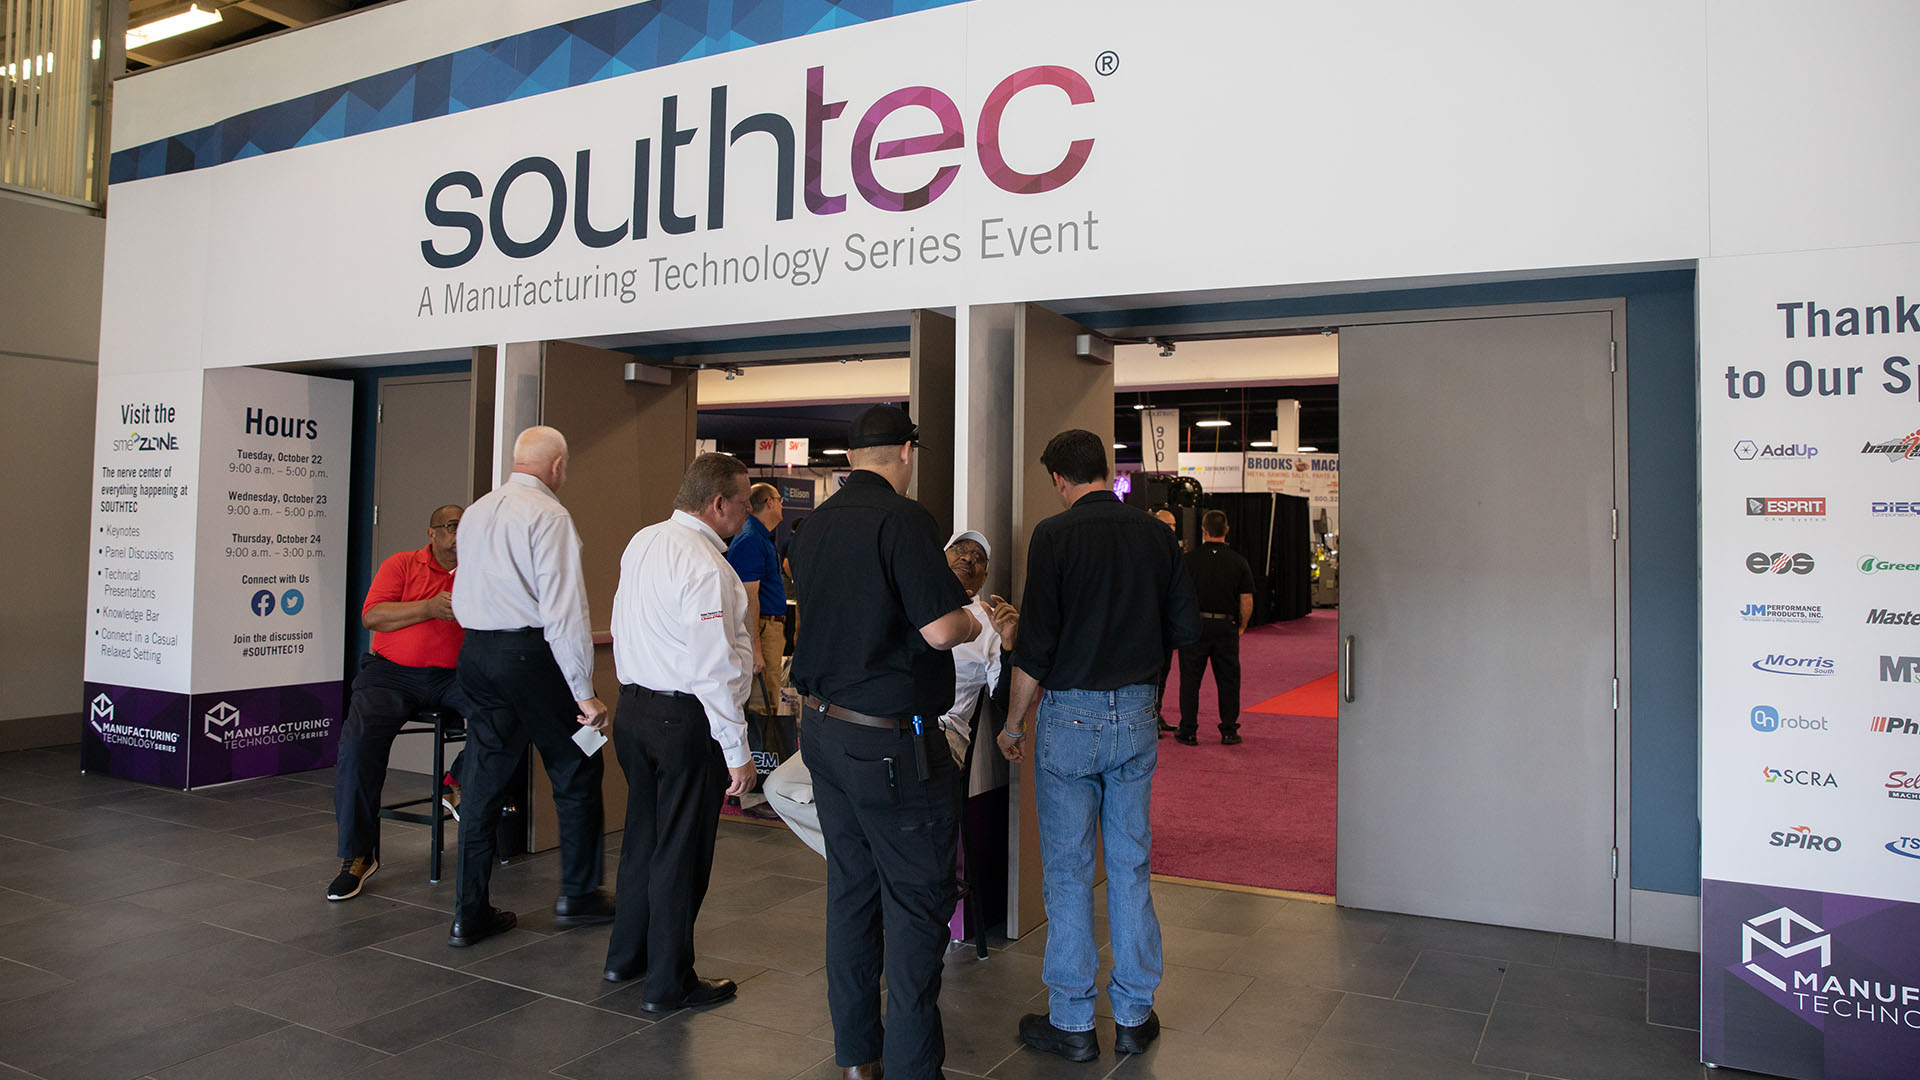 More than 5,900 manufacturing professionals and leaders descended on Greenville, S.C., for SOUTHTEC 2019.